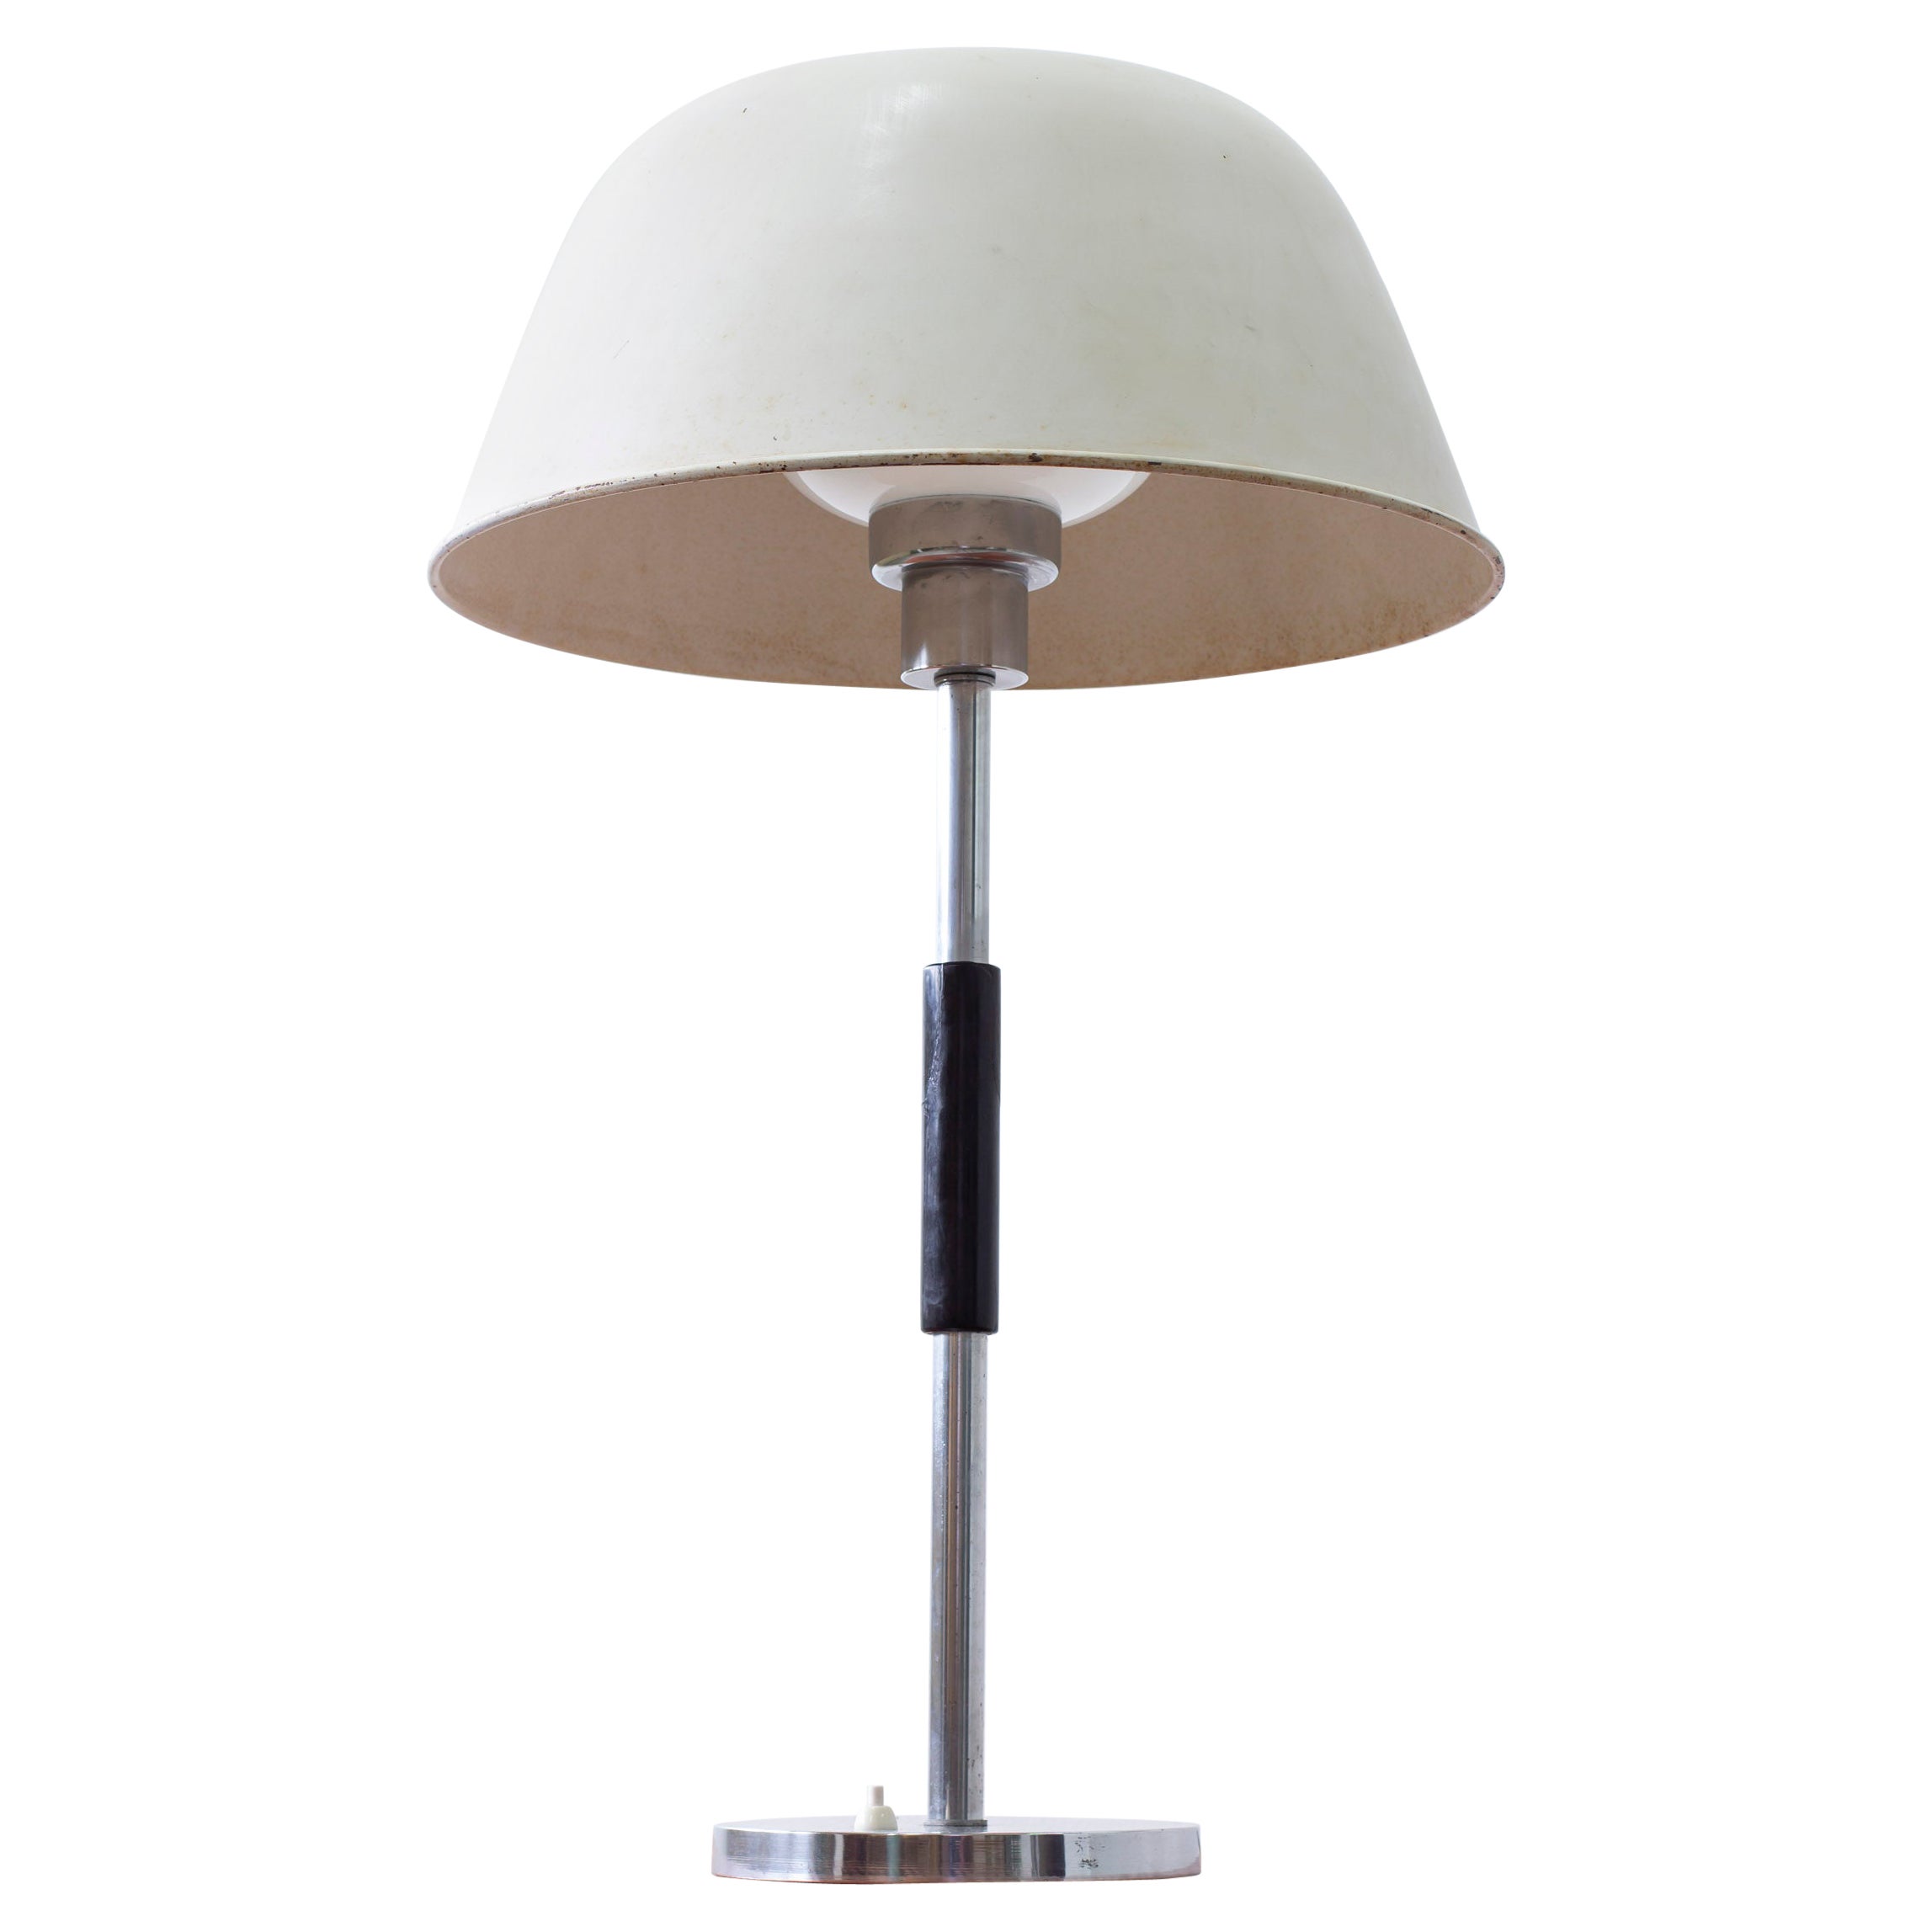 Modernist table lamp by Christian Bergh & Co for ASEA belysning, Sweden, 1930s